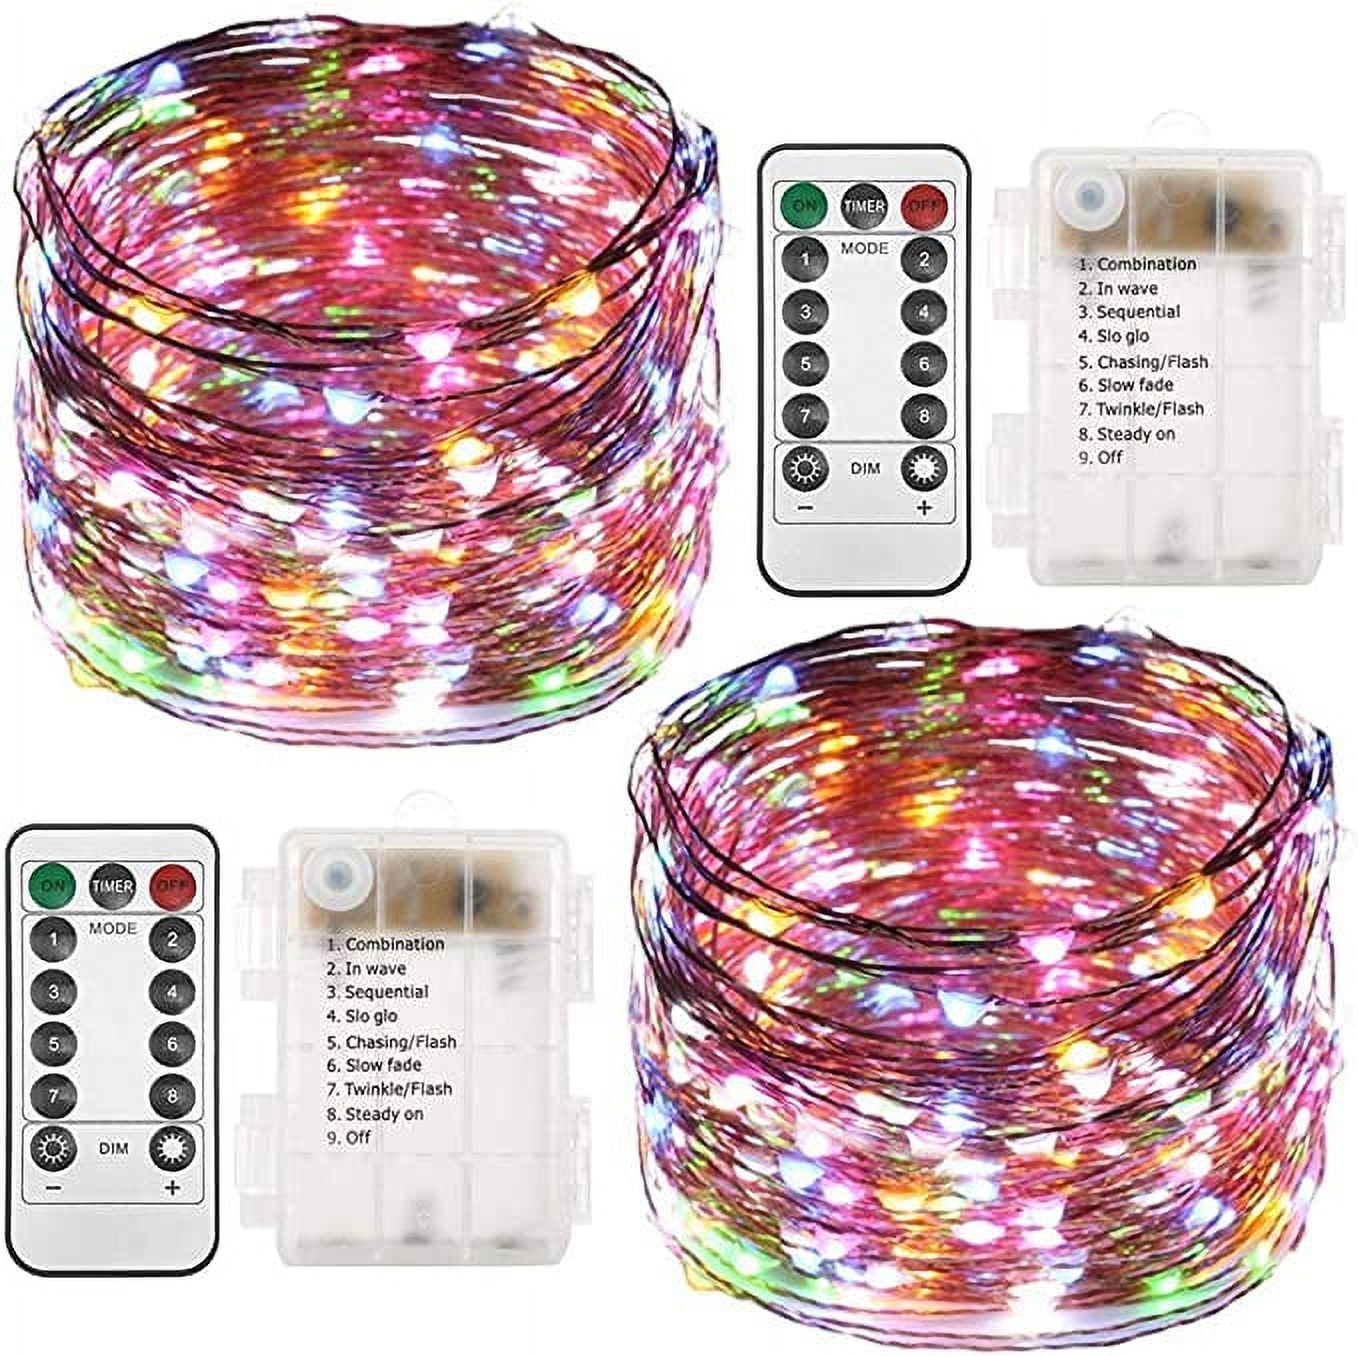 MEIMEI LIGHTING 5mm Christmas Lights Battery Operated 16ft 50 LED String  Lights with Remote Timer 8 …See more MEIMEI LIGHTING 5mm Christmas Lights